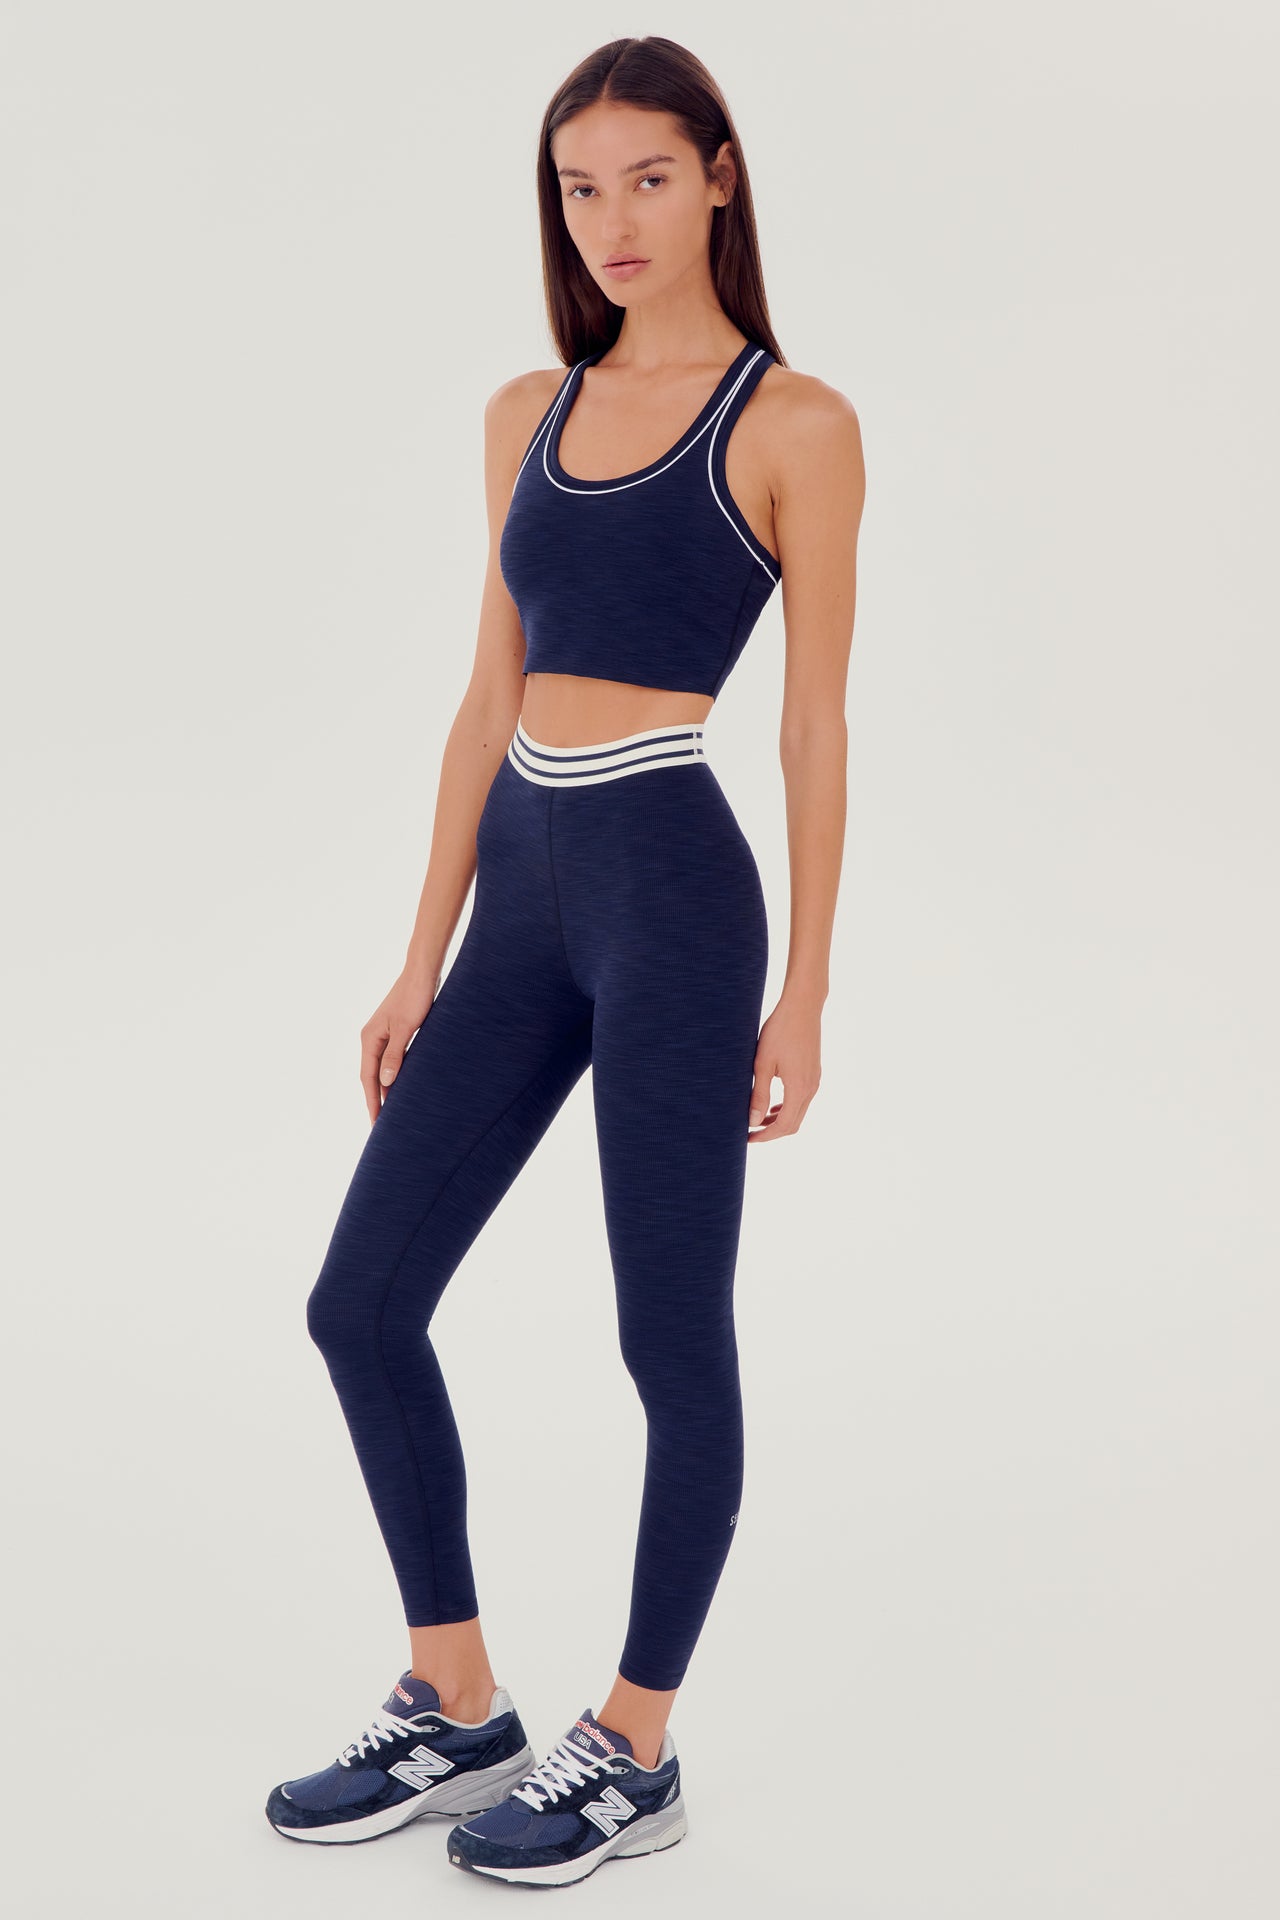 Full side view of girl wearing a dark blue leggings with white and blue waistband and a dark blue ribbed bra that stops at the ribs with thin white line along arms with blue shoes